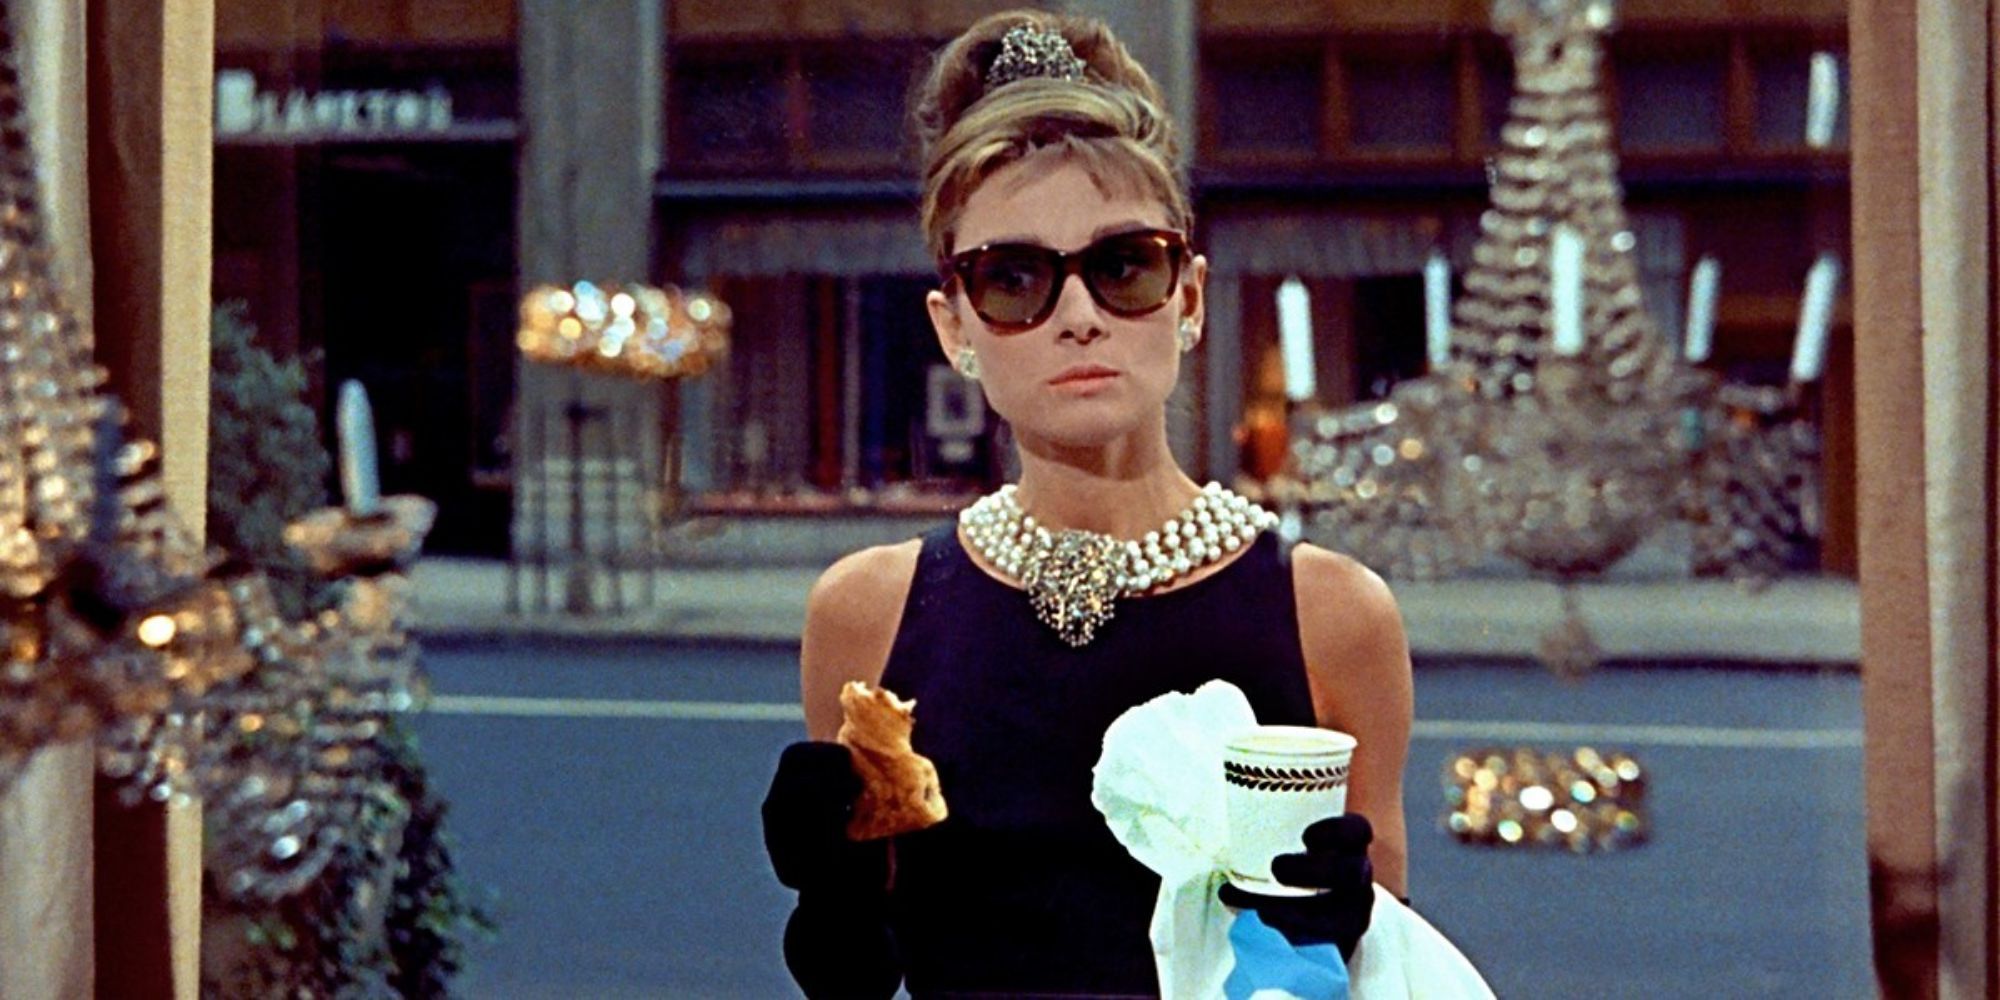 Holly Golightly holding a bagle and a cup of coffee in Breakfast at Tiffany's